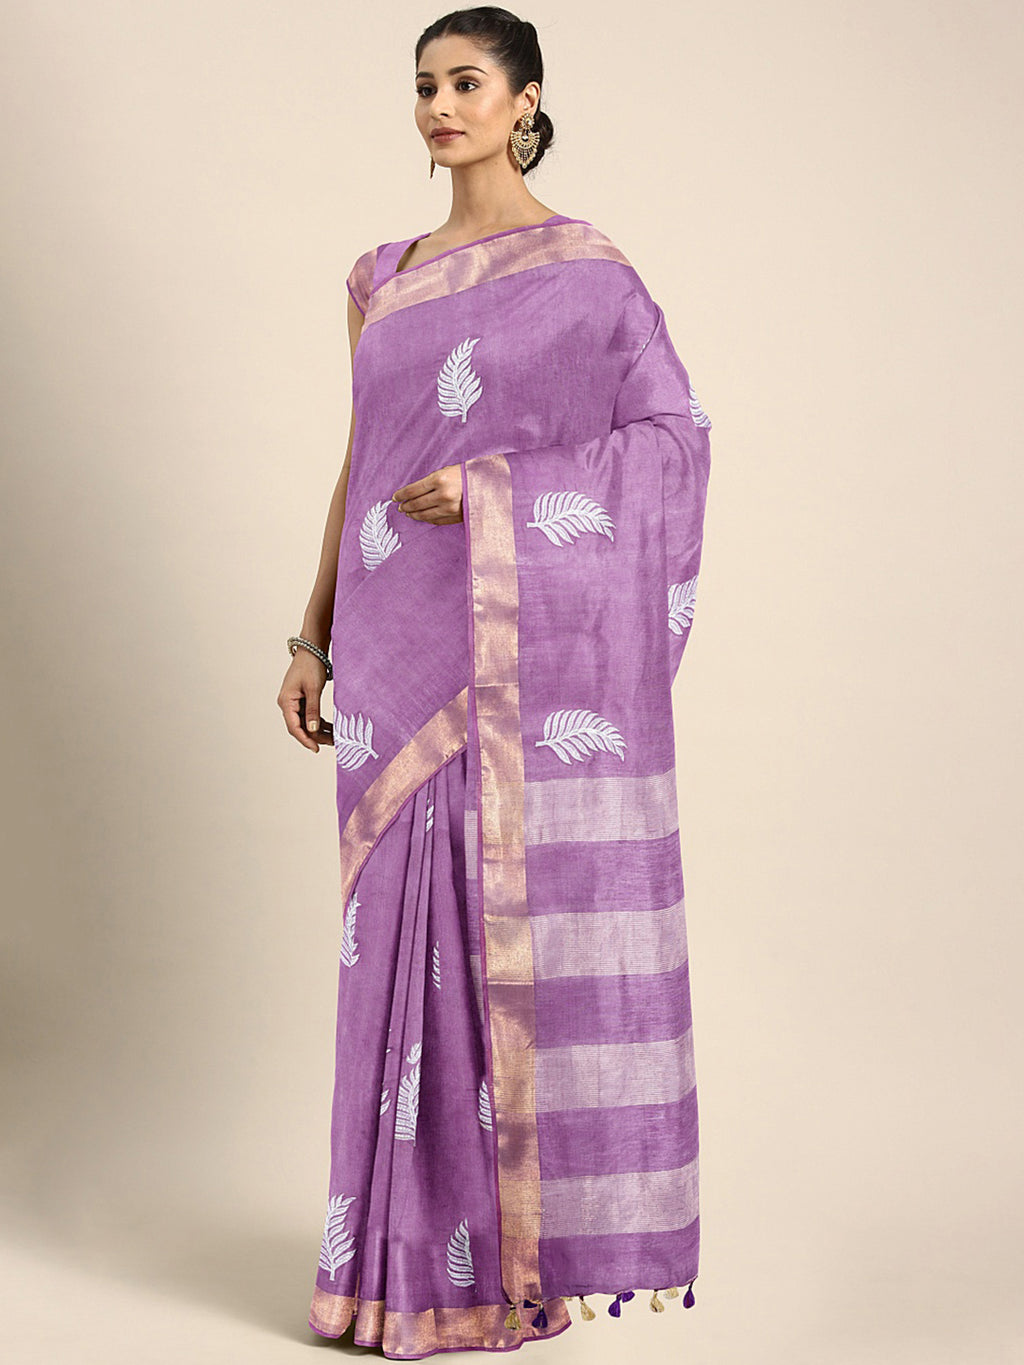 Kalakari India Kota Silk Embroidered Saree With Blouse ALBGSA0166-Saree-Kalakari India-ALBGSA0166-Geographical Indication, Hand Crafted, Heritage Prints, Linen, Natural Dyes, Pure Cotton, Sarees, Sustainable Fabrics, Woven-[Linen,Ethnic,wear,Fashionista,Handloom,Handicraft,Indigo,blockprint,block,print,Cotton,Chanderi,Blue, latest,classy,party,bollywood,trendy,summer,style,traditional,formal,elegant,unique,style,hand,block,print, dabu,booti,gift,present,glamorous,affordable,collectible,Sari,Sare